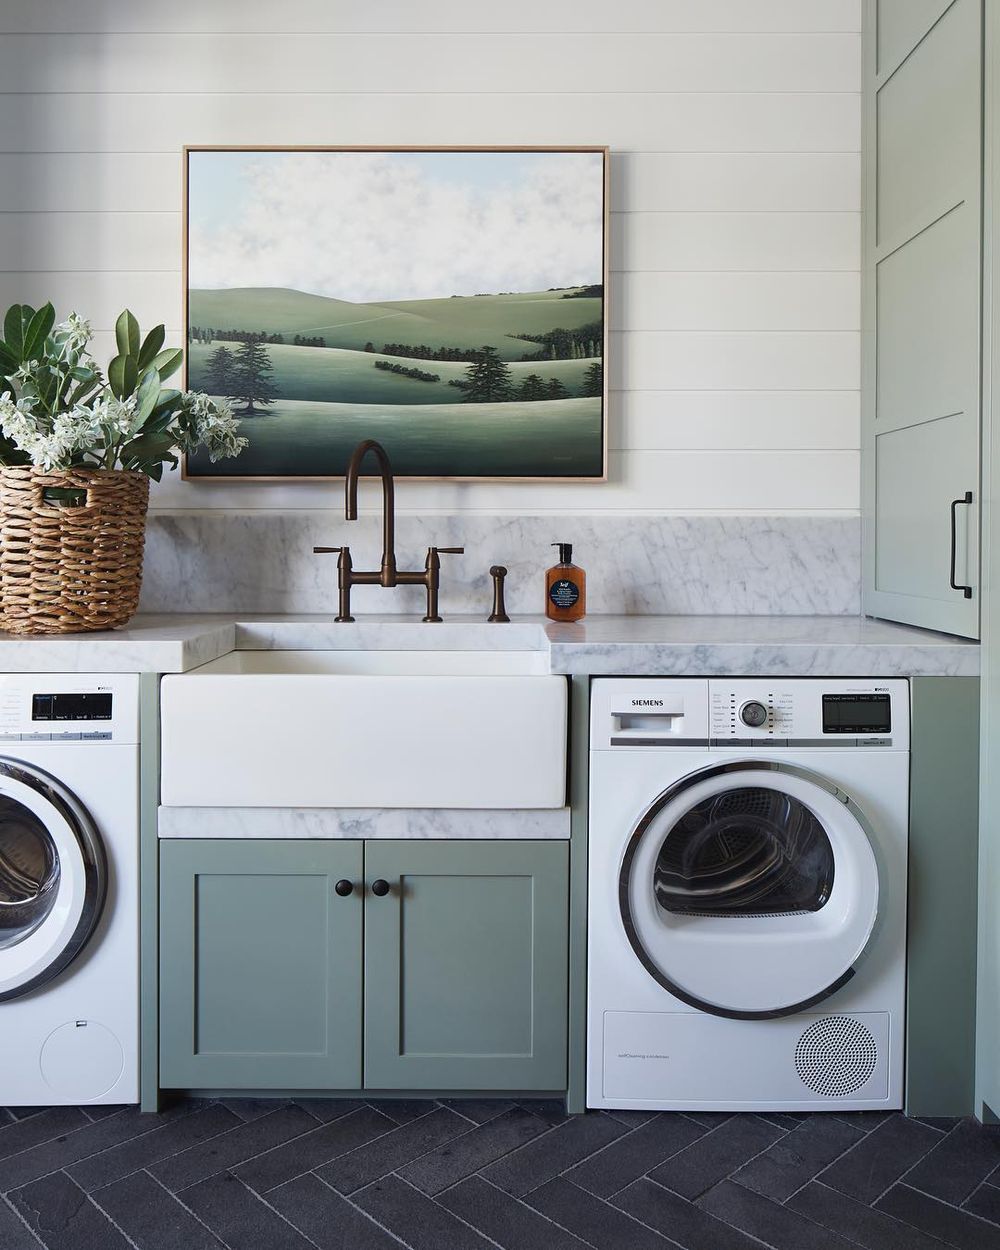 Laundry Room dreamy painting on the wall via @katewalker_design